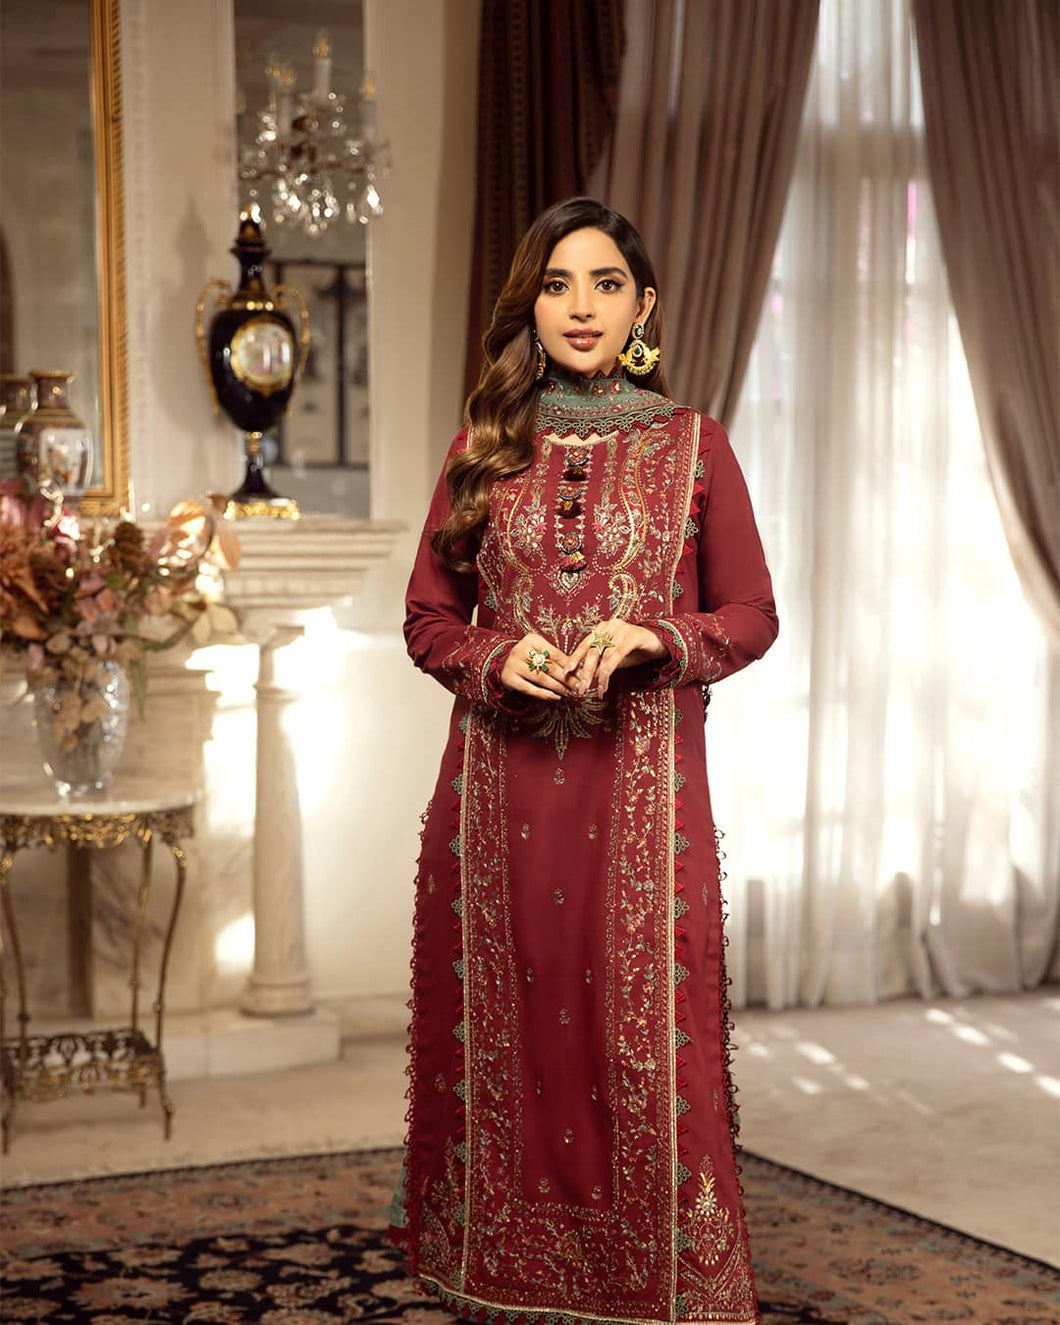 Buy Asim Jofa | Jofa Prints Aira Collection New collection of ASIM JOFA WEDDING LAWN COLLECTION 2023 from our website. We have various PAKISTANI DRESSES ONLINE IN UK, ASIM JOFA CHIFFON COLLECTION. Get your unstitched or customized PAKISATNI BOUTIQUE IN UK, USA, UAE, FRACE , QATAR, DUBAI from Lebaasonline @ Sale price.